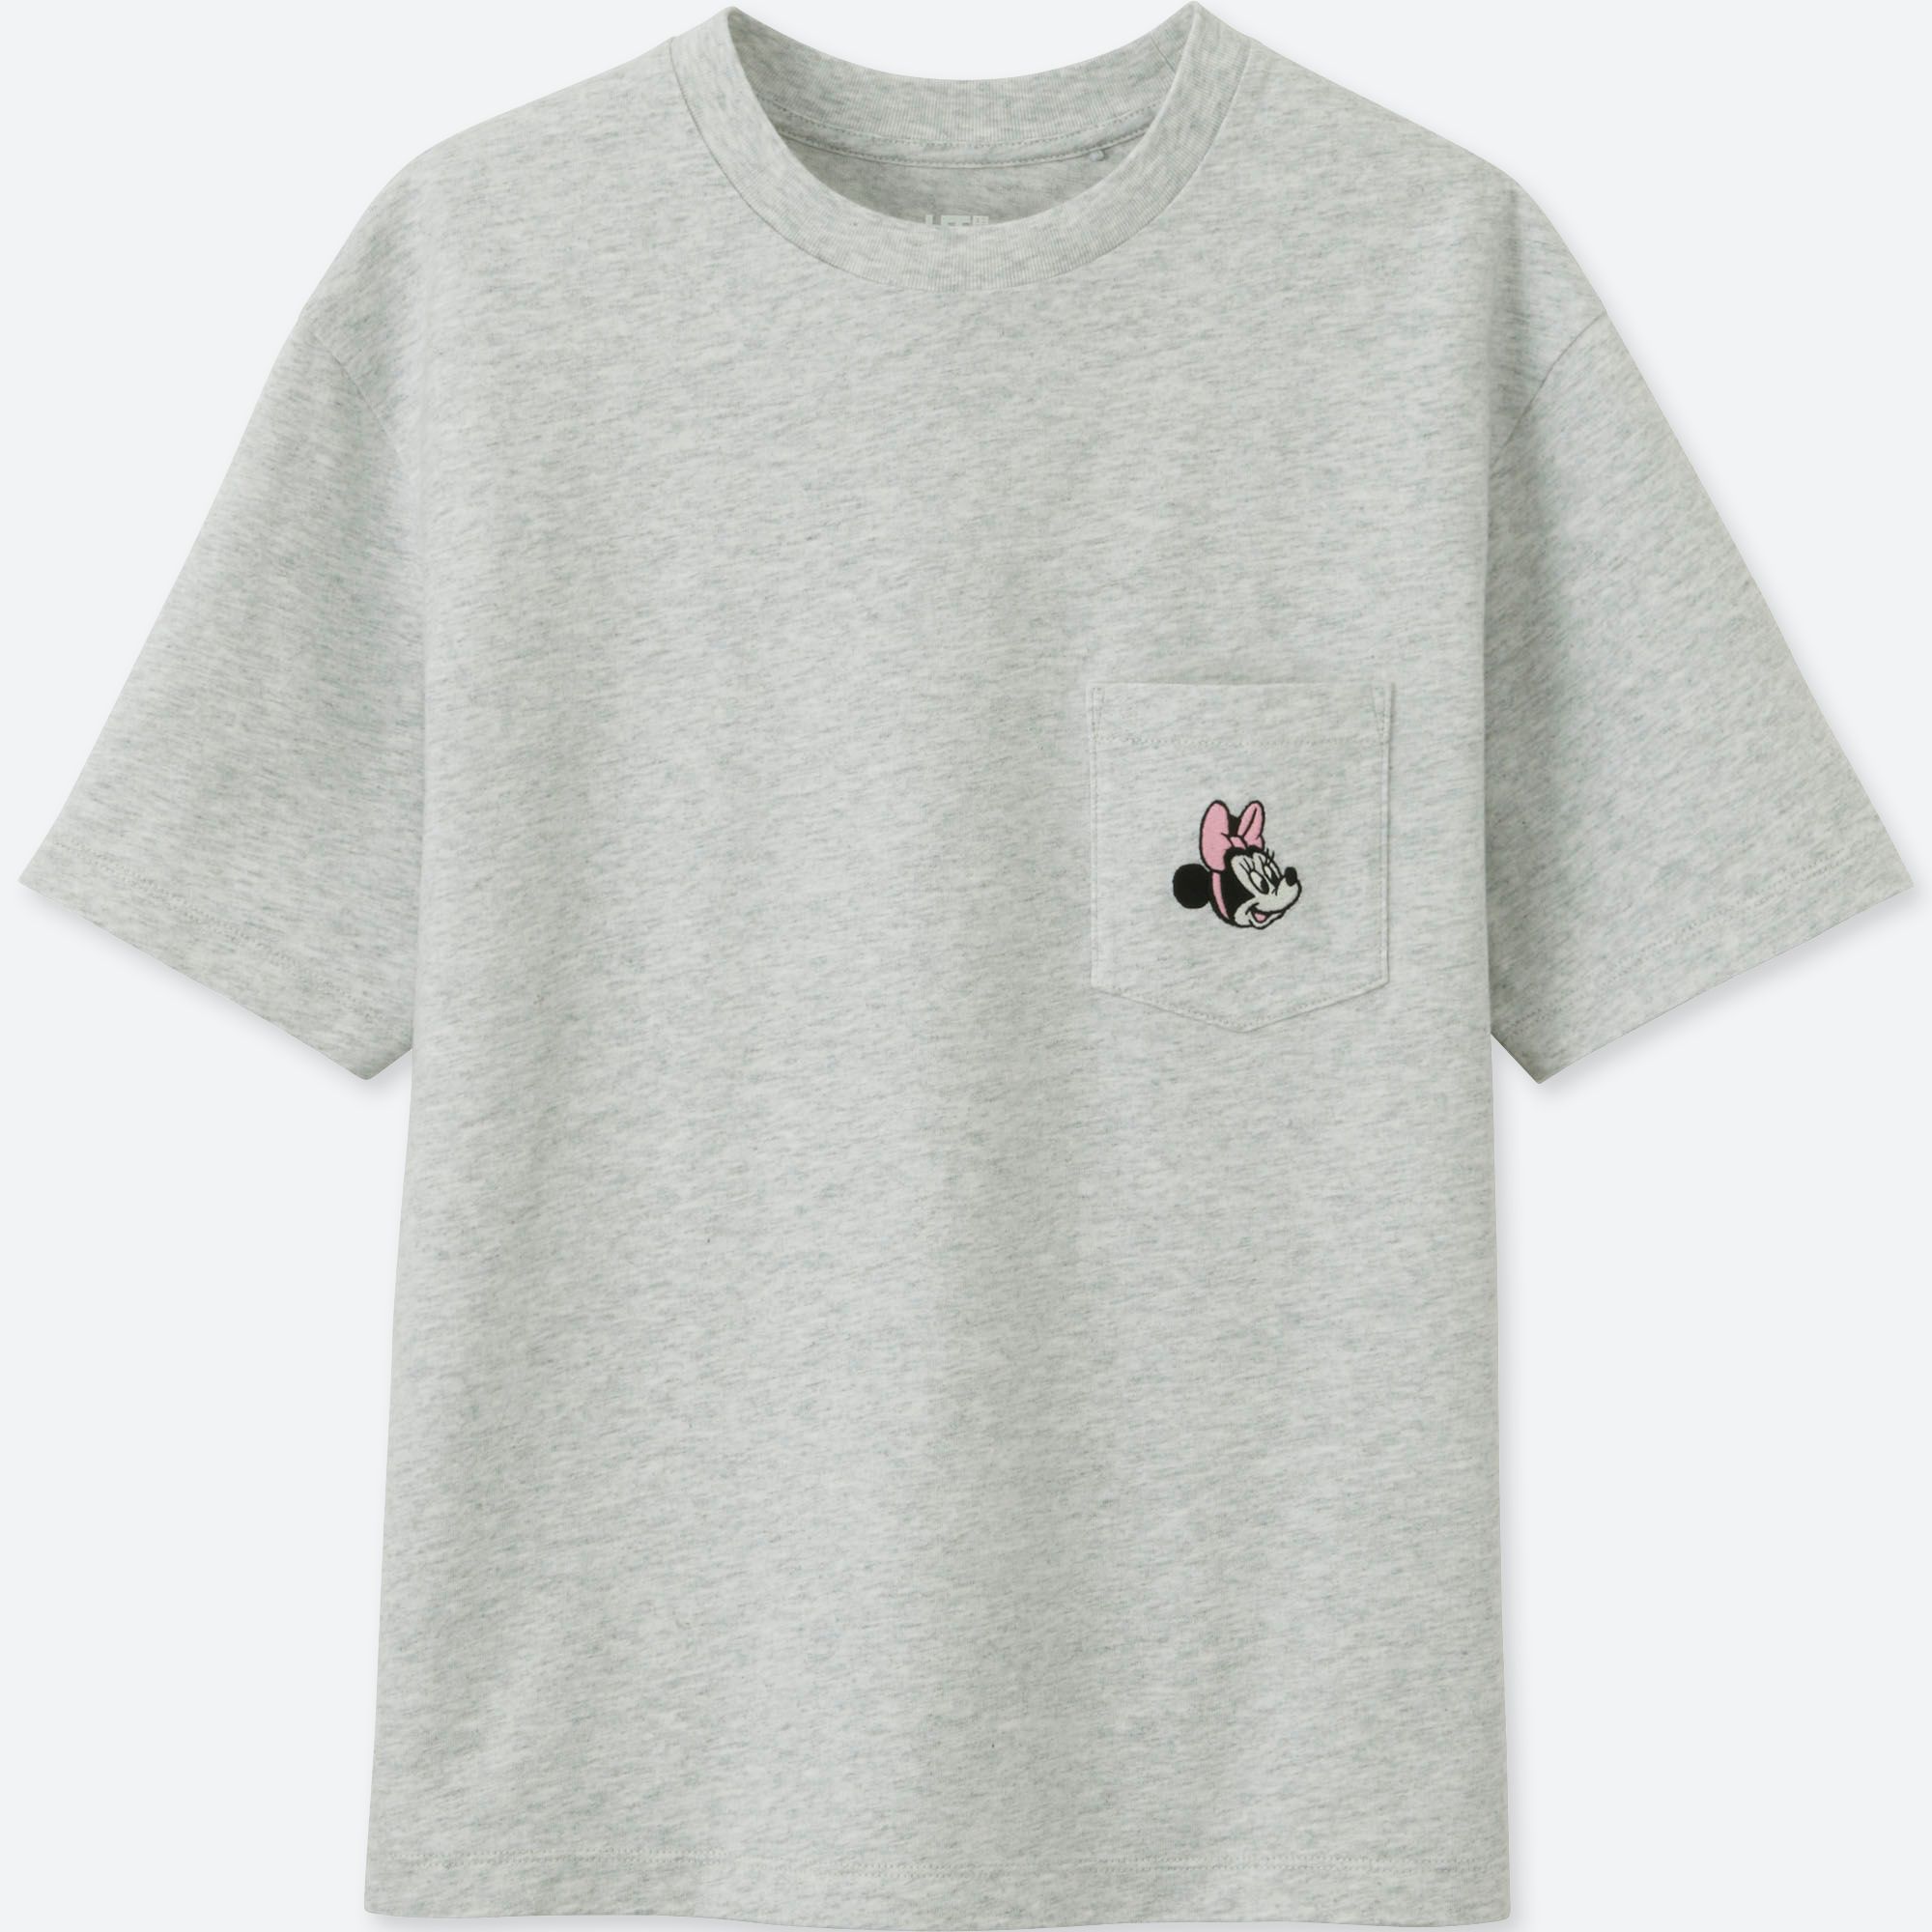 Uniqlo's Whimsical Minnie Mouse Best Friends Forever Line